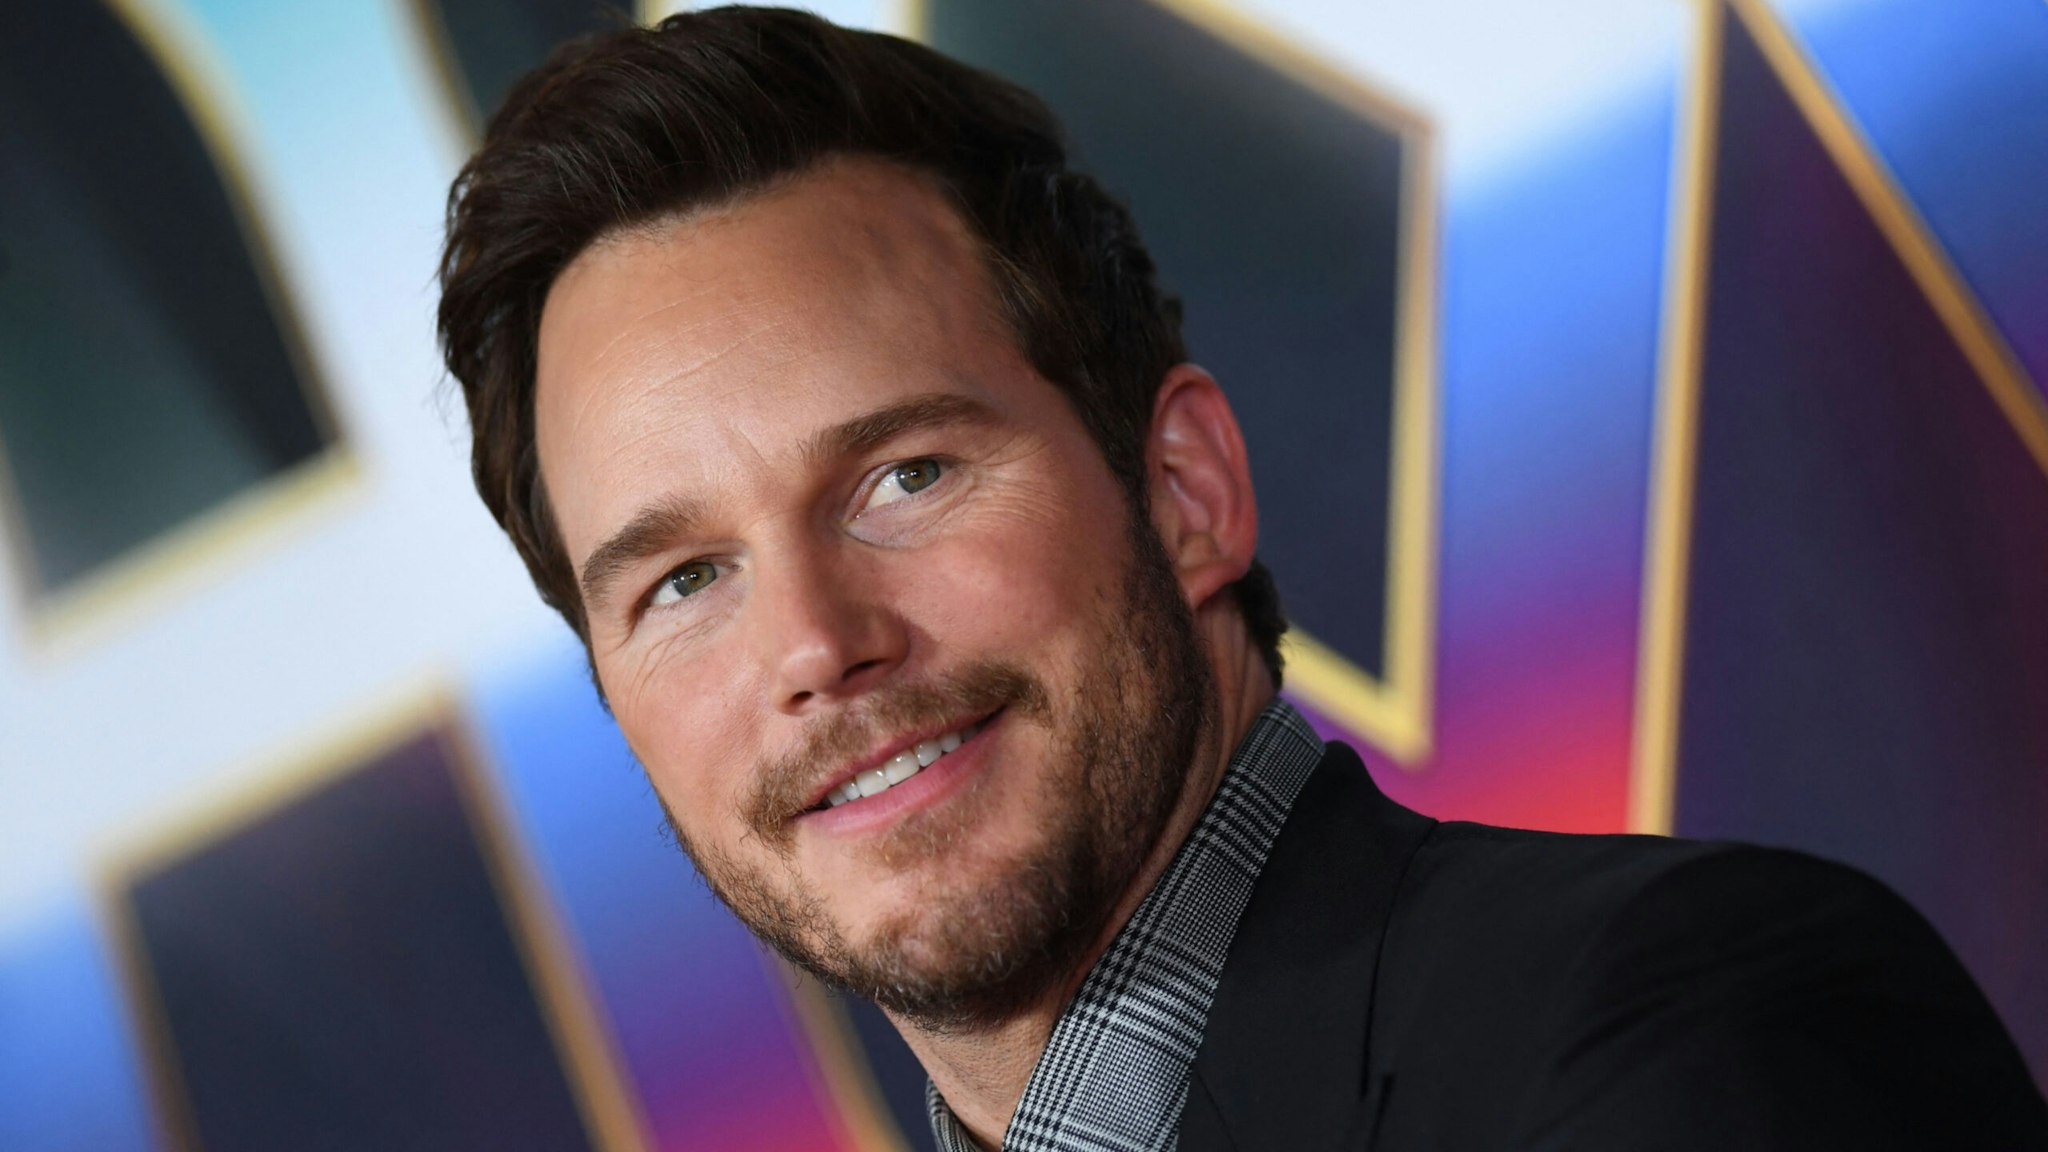 US actor Chris Pratt arrives for Marvel Studios "Thor: Love And Thunder" world premiere at the El Capitan theatre in Los Angeles, June 23, 2022.